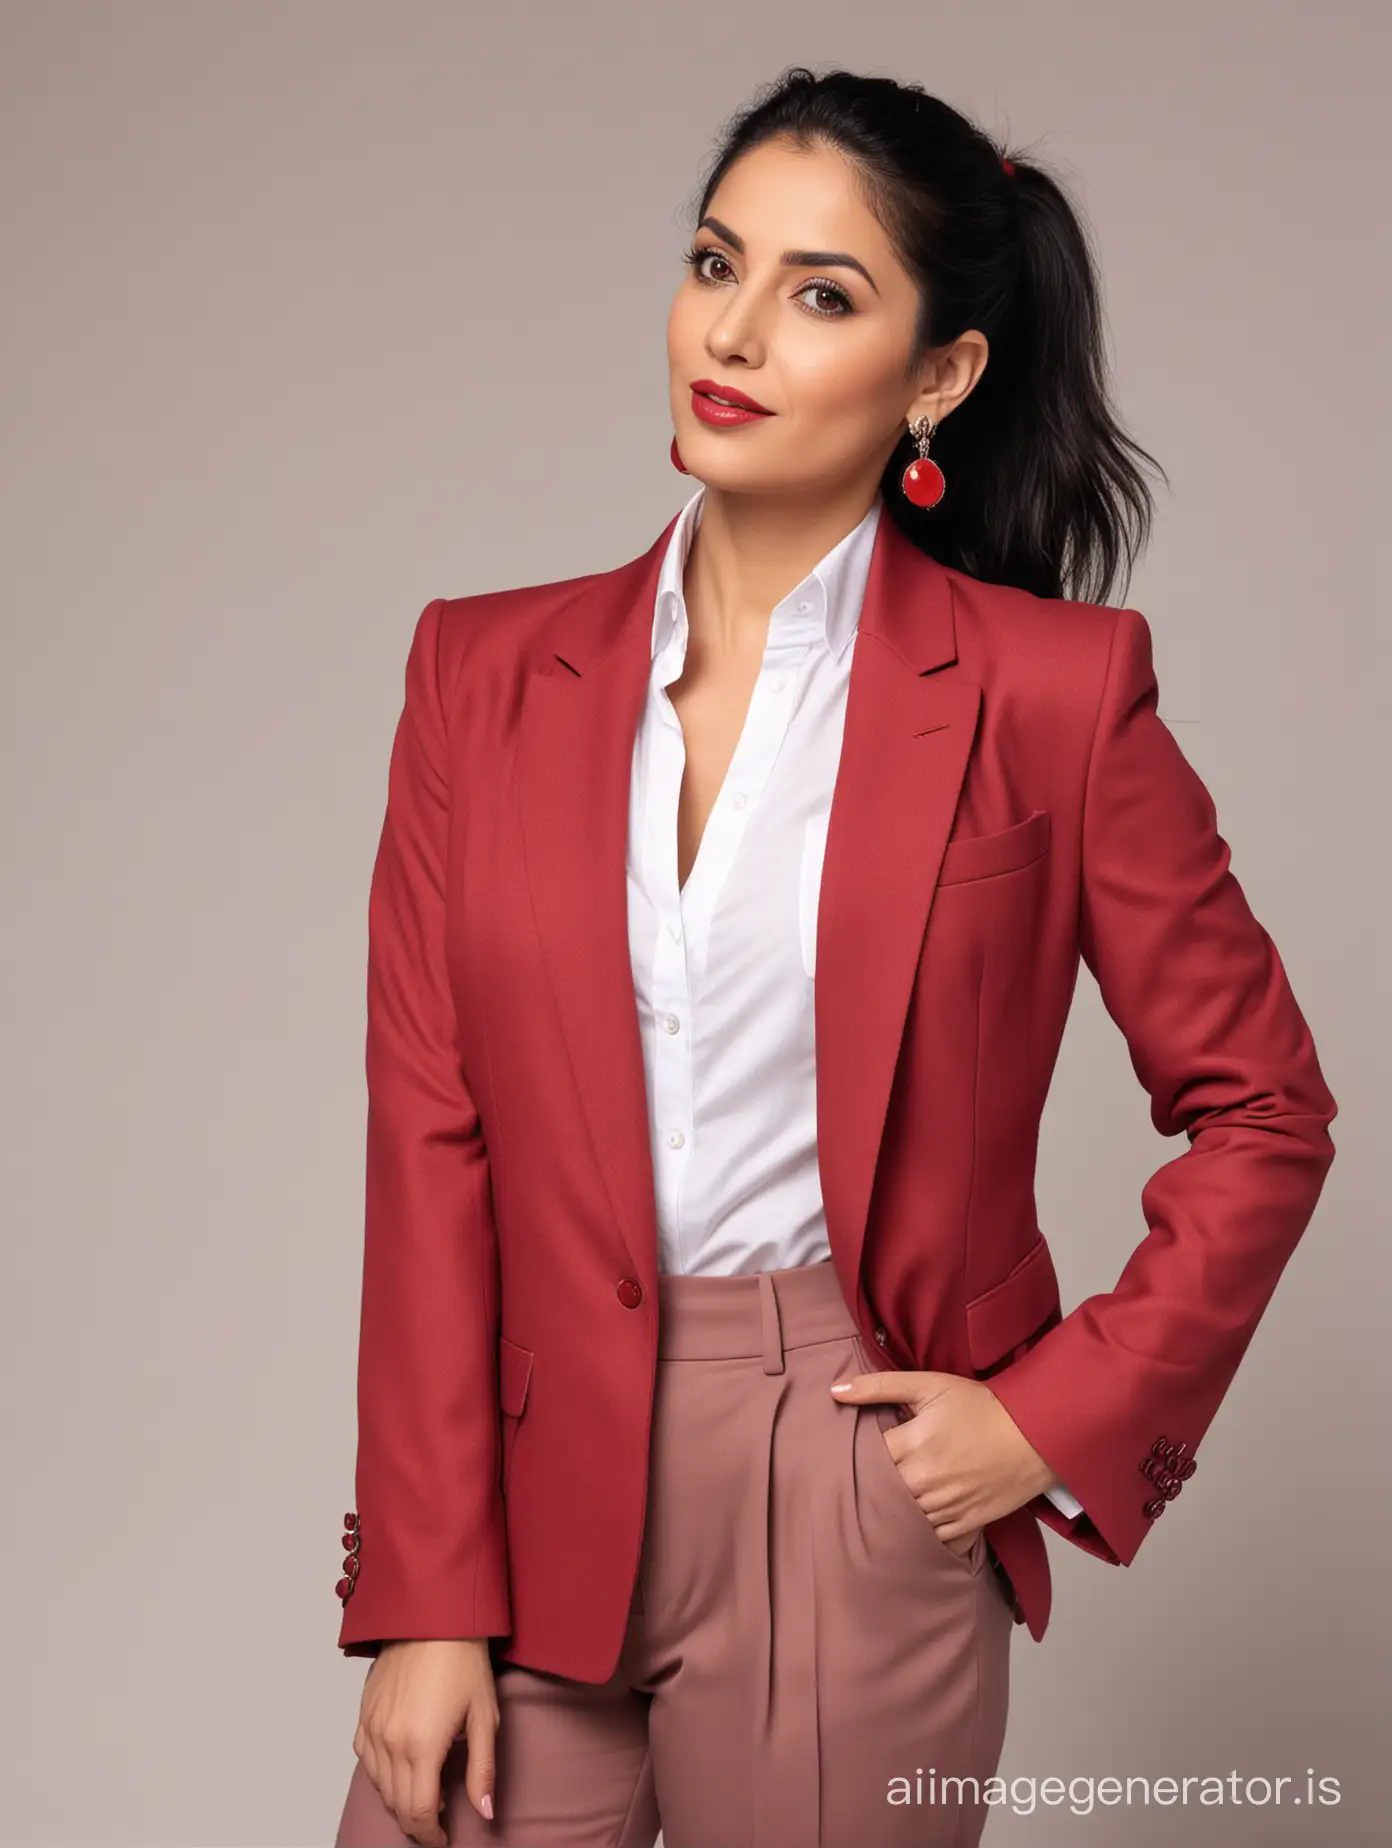 Stylish-Iranian-Woman-in-Crimson-Blazer-with-Red-Accessories-on-White-Background